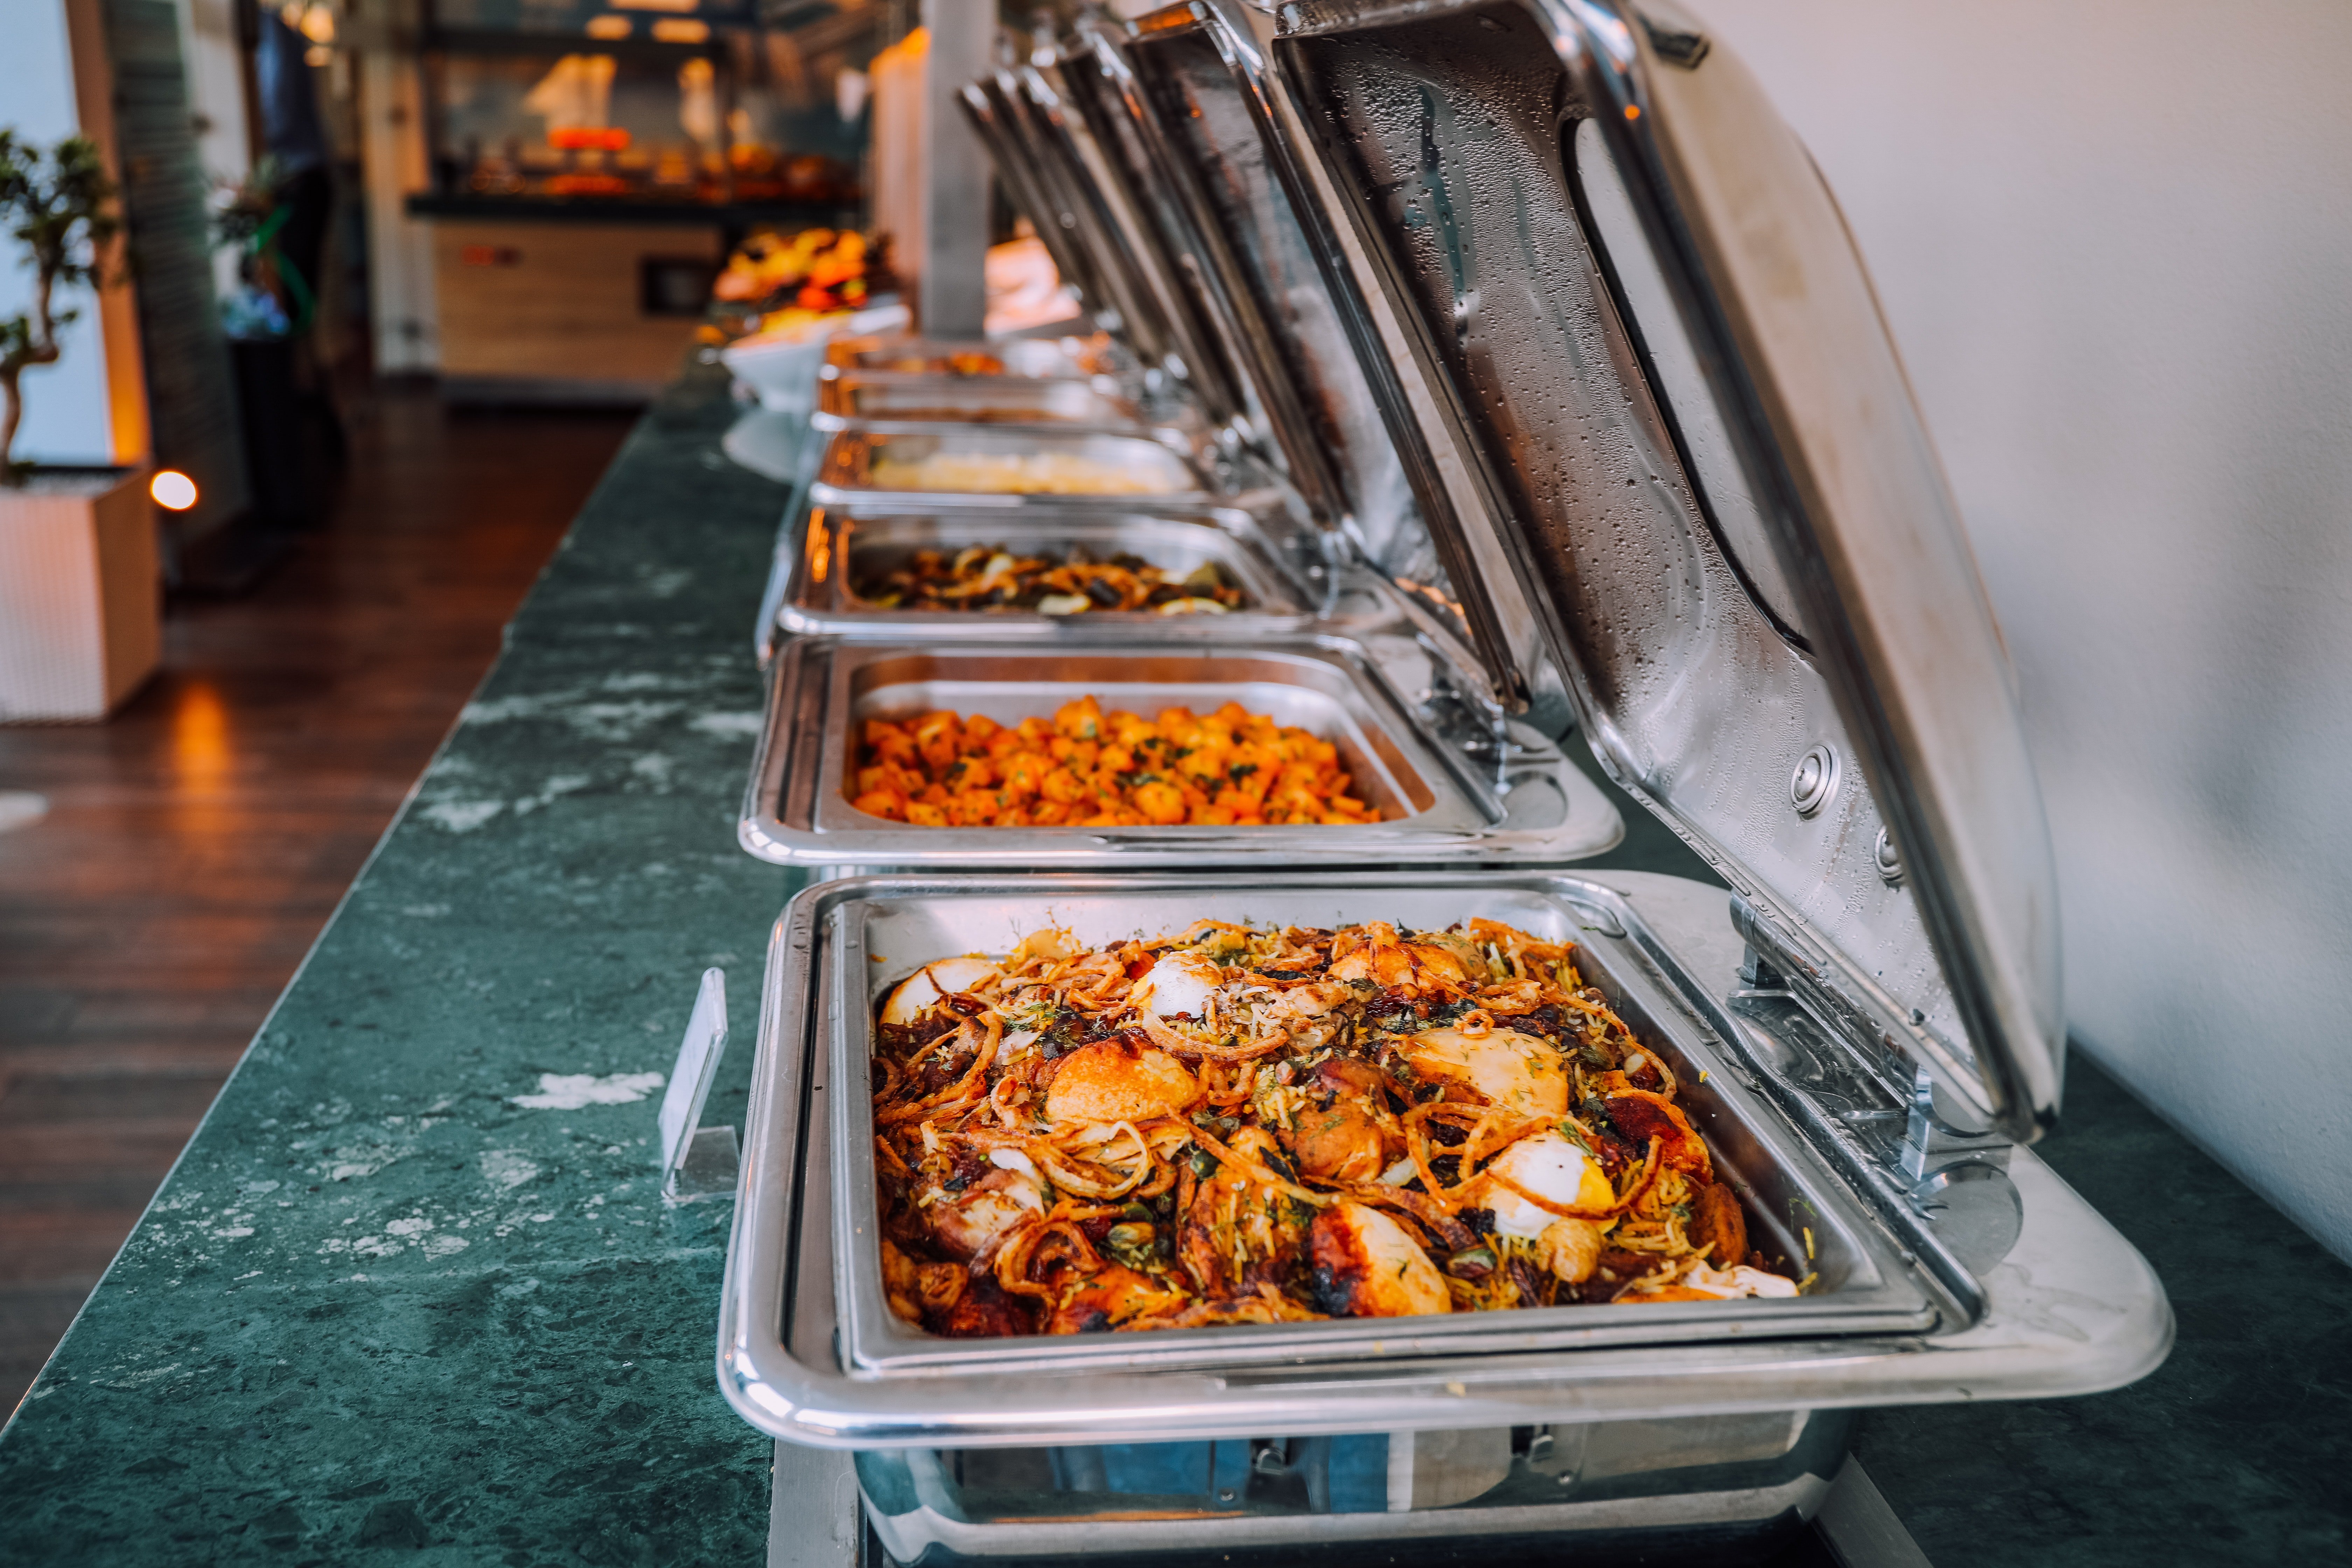 Jessica decided to get some food for the old man from the buffet, hoping it would get him to leave. | Source: Pexels